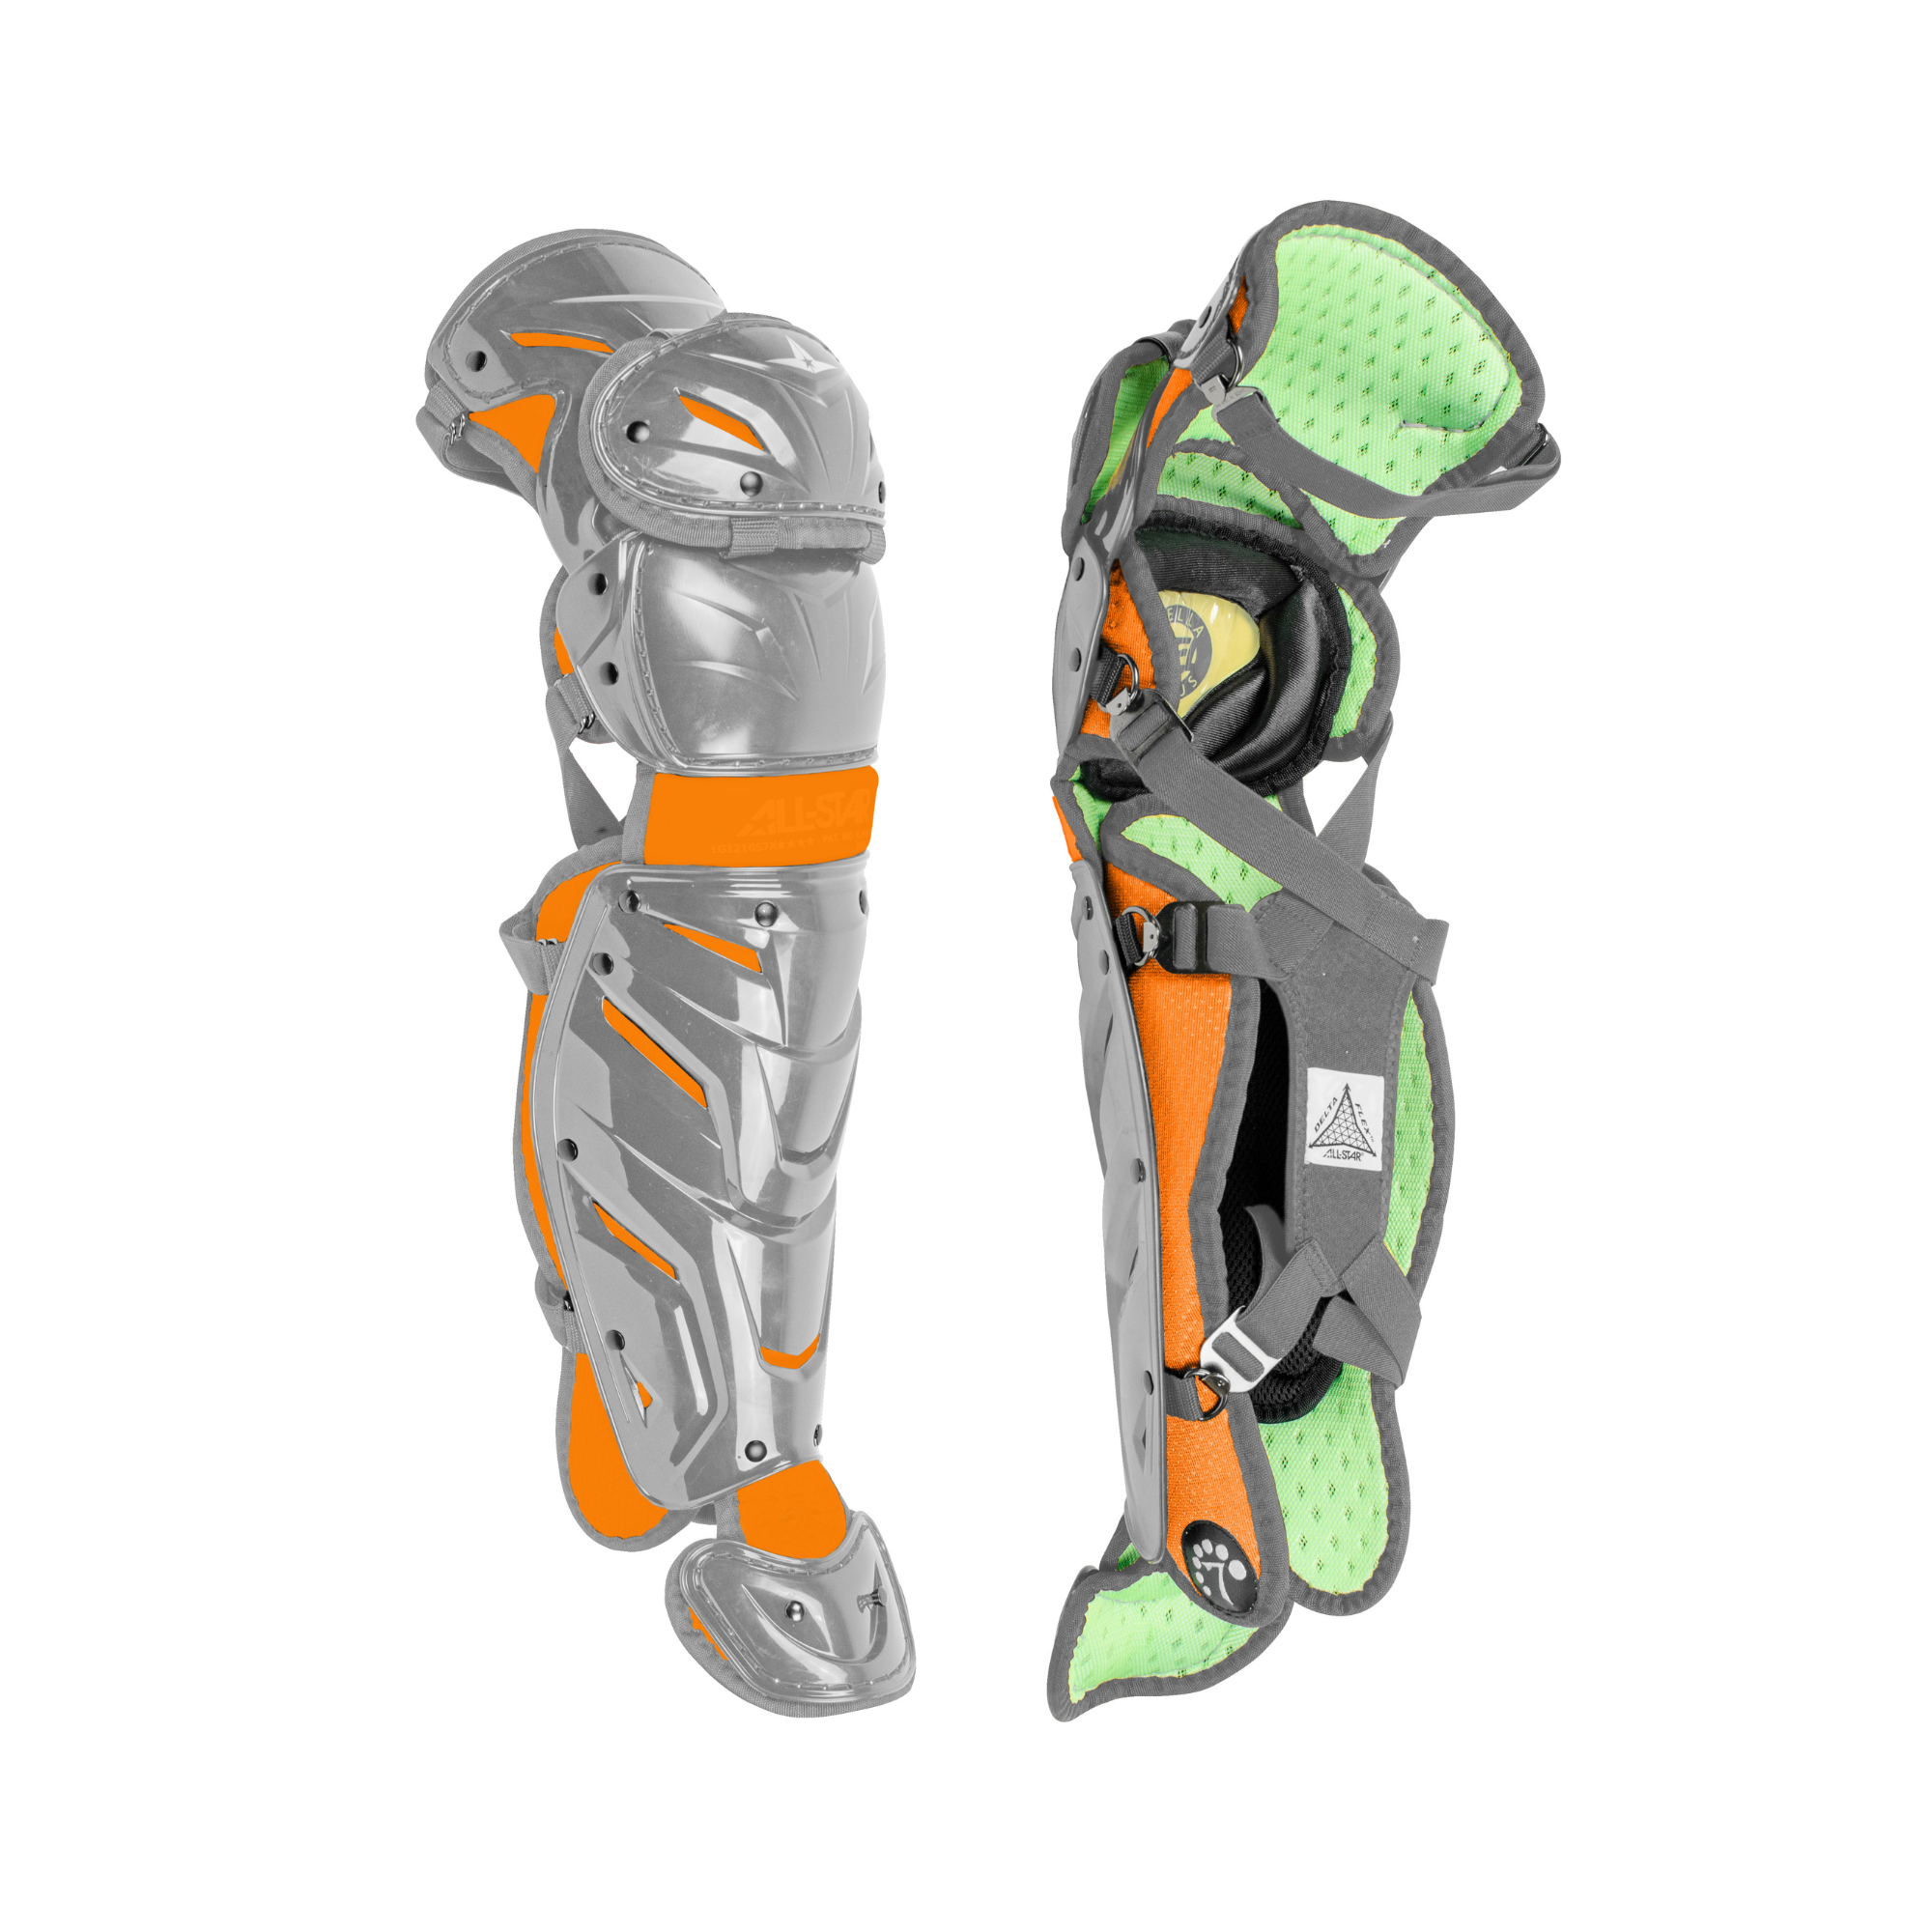 All-Star S7 AXIS Leg Guards / Two Tone Ages 9-12